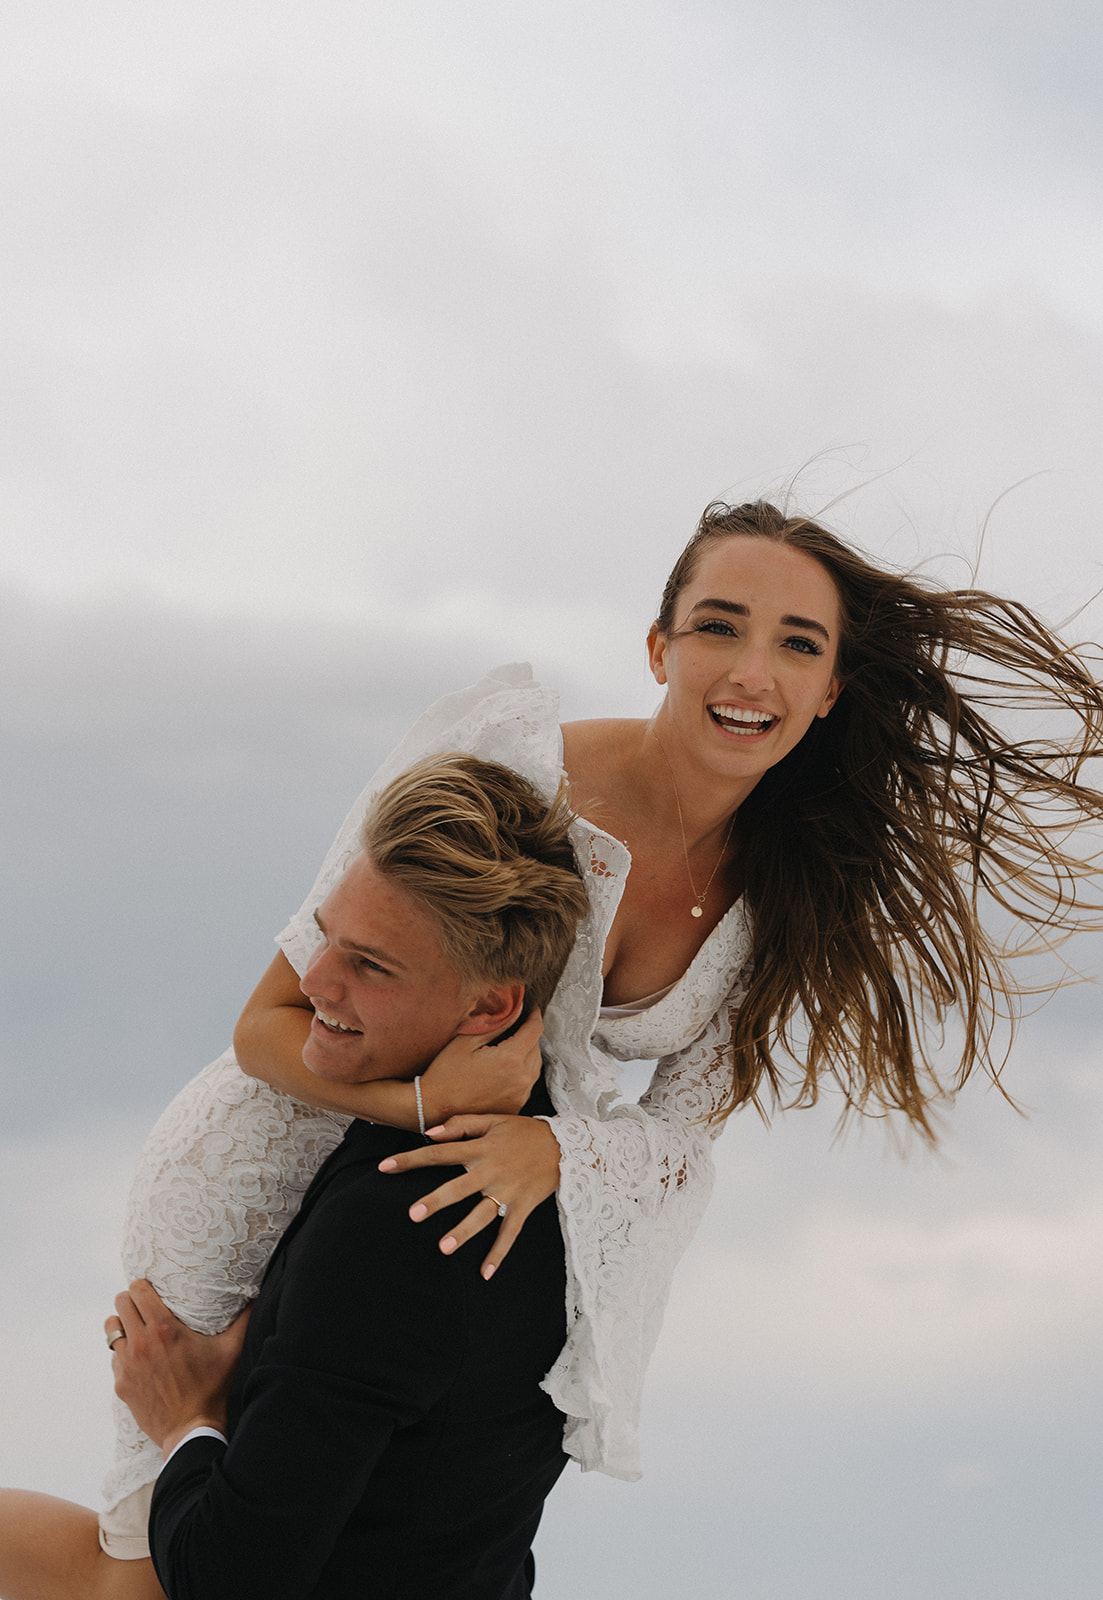 A groom lifts his bride over his shoulder while laughing